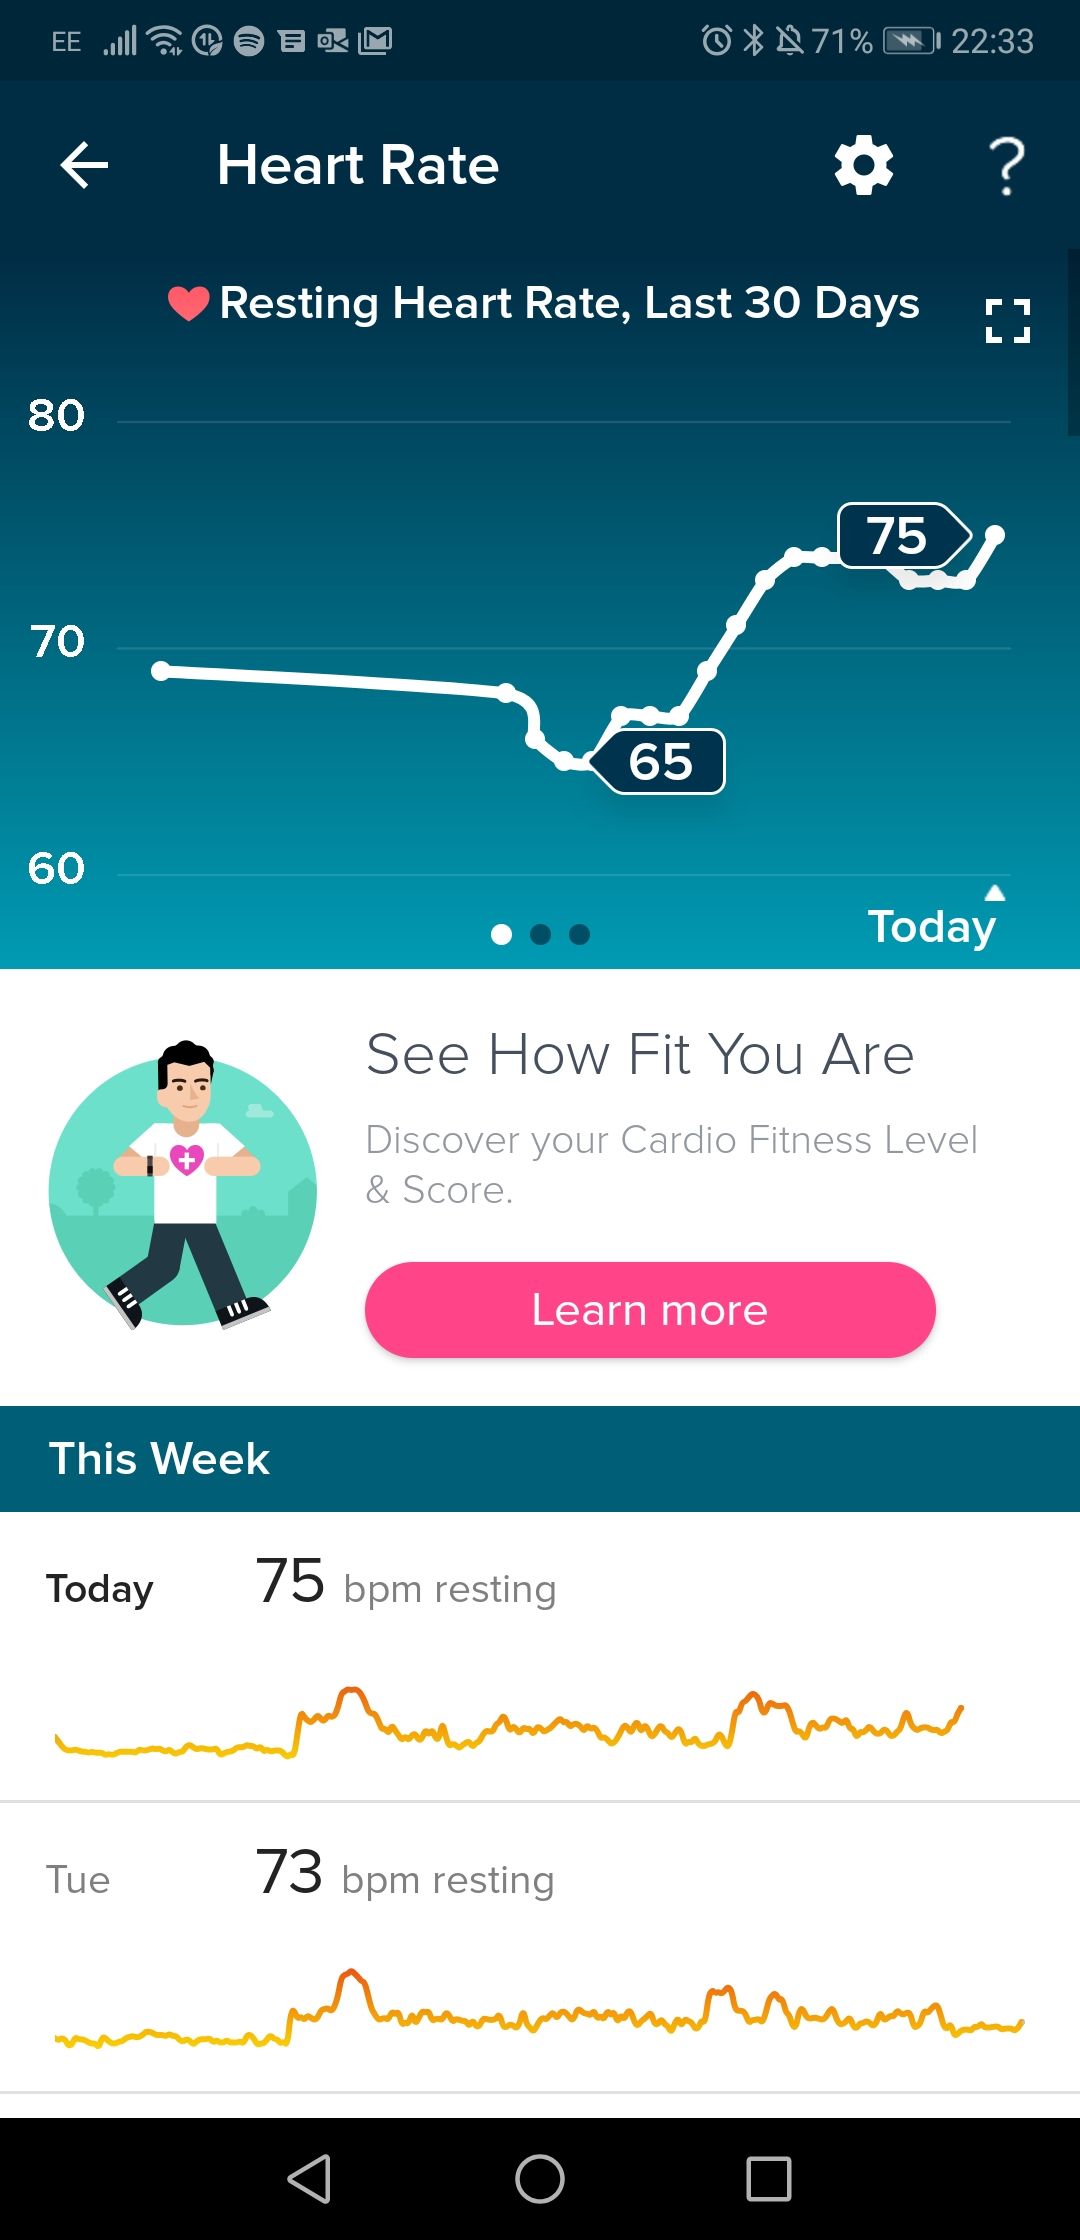 Solved: Increase in resting heart rate 